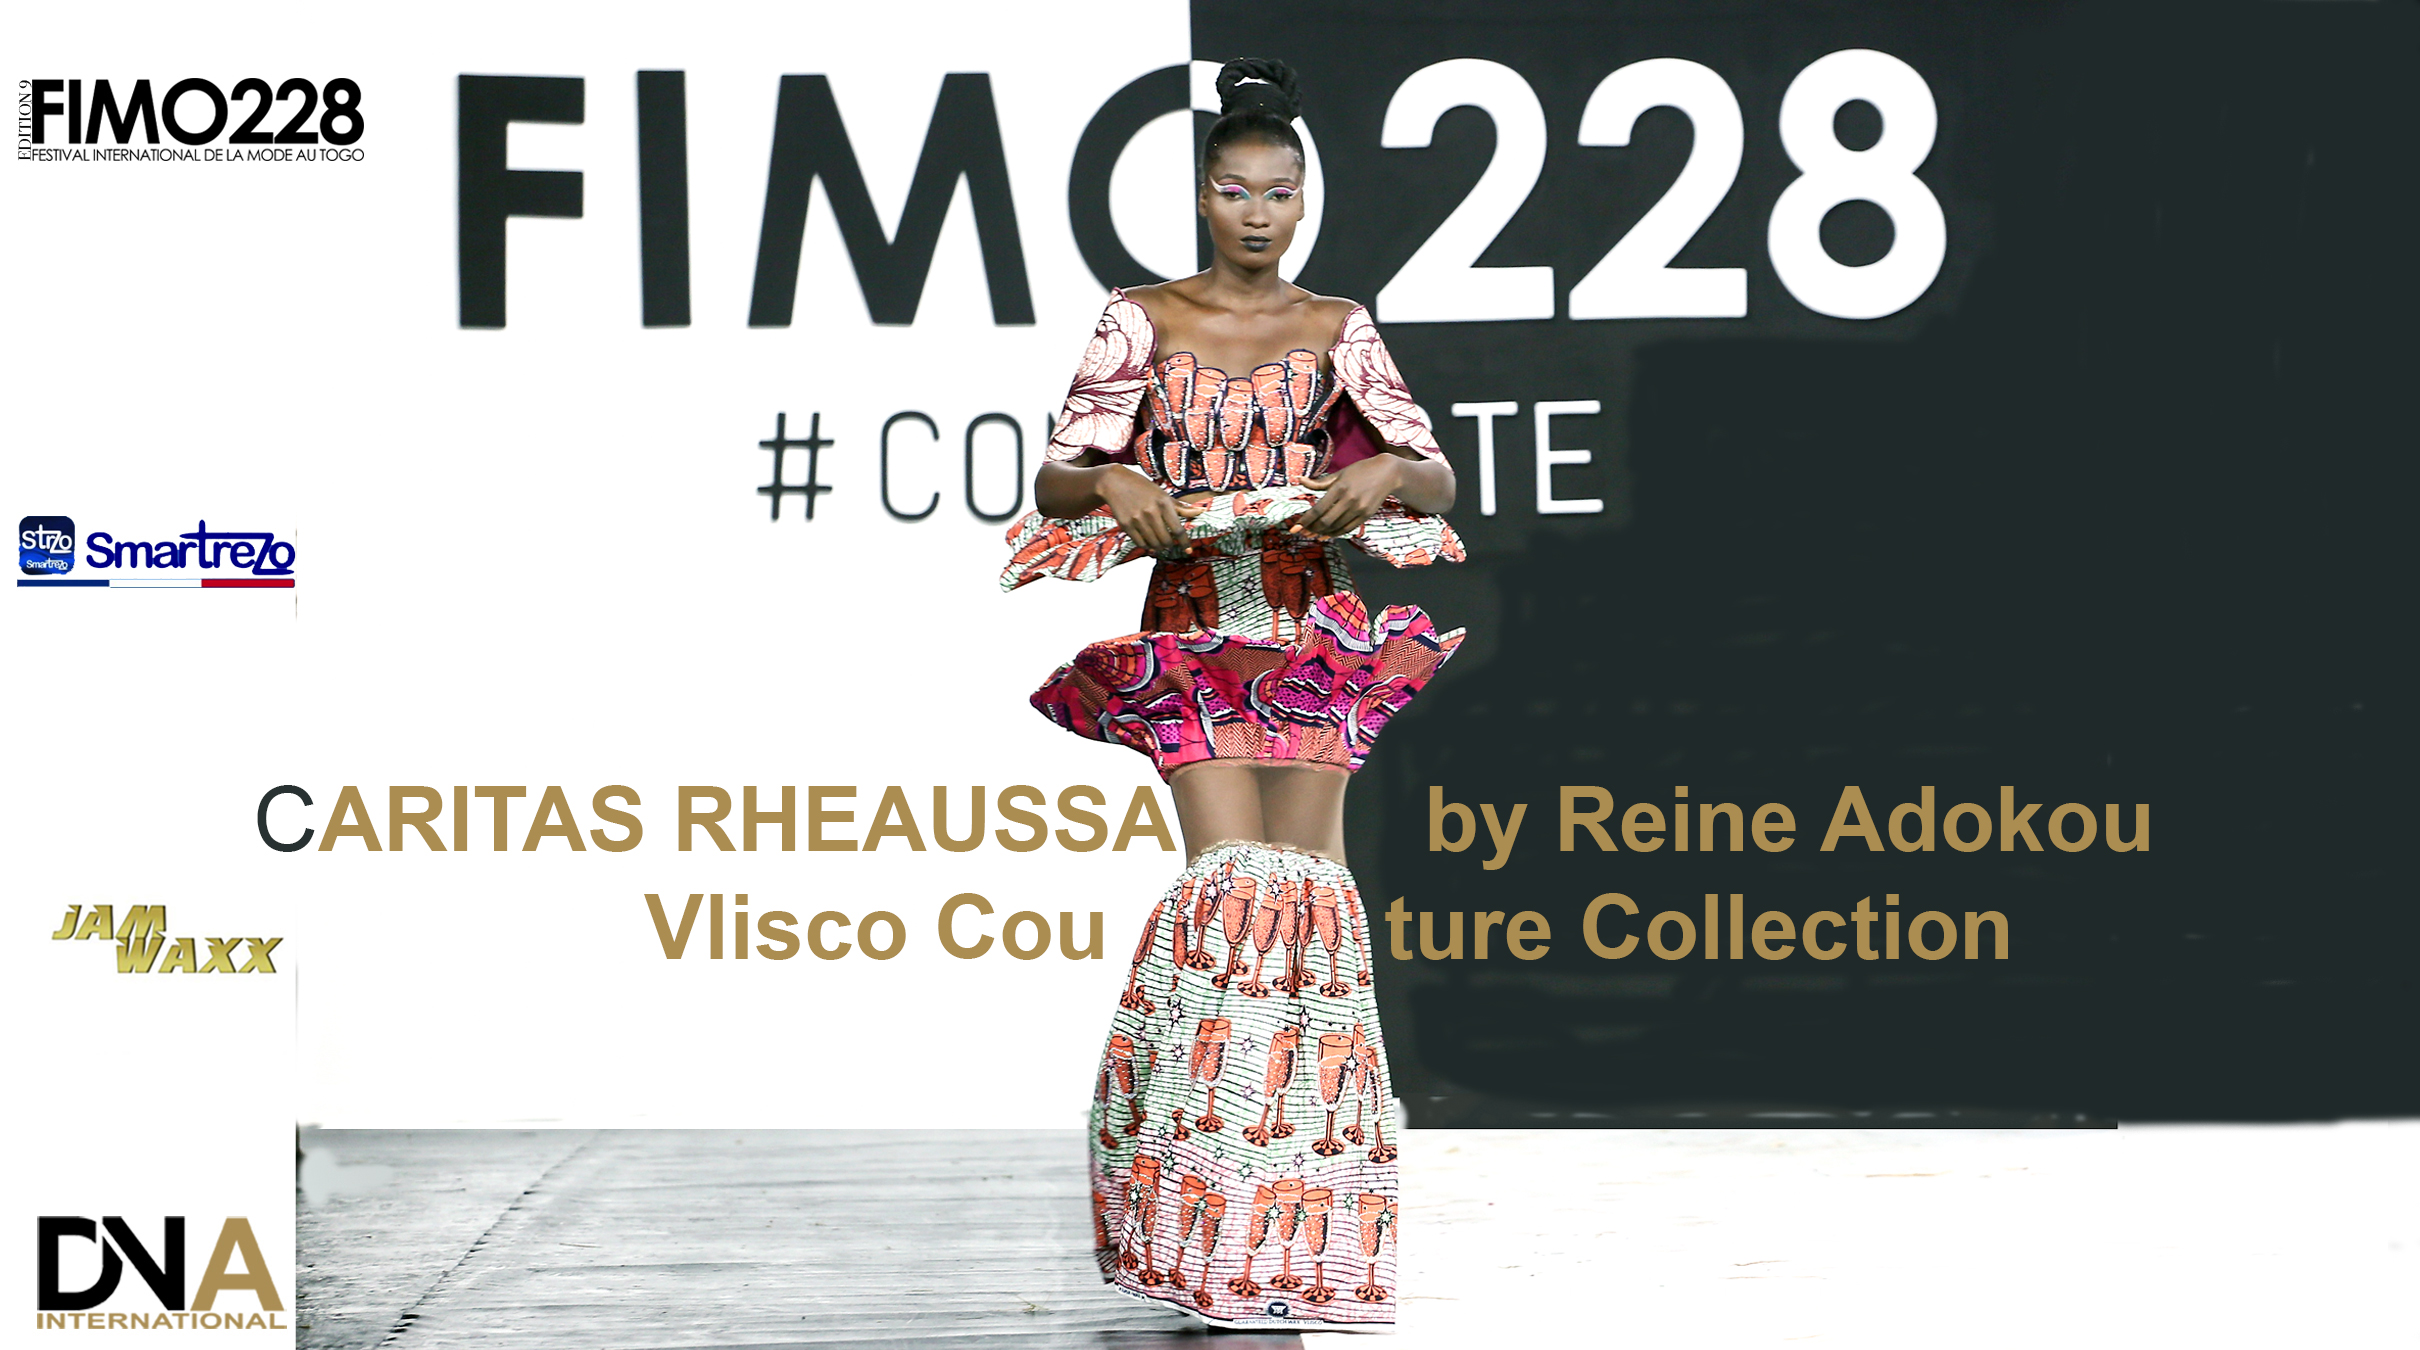 FIMO-228-EDITION-9-CLASSIC-FASHION-SHOW-Couture-Collection-CARITAS-RHEAUSSA-by-Reine-Adokou-Vlisco-Couture-Collection-DNAFRICA-DNA-INTERNATIONAL-MEDIA-PARTNER